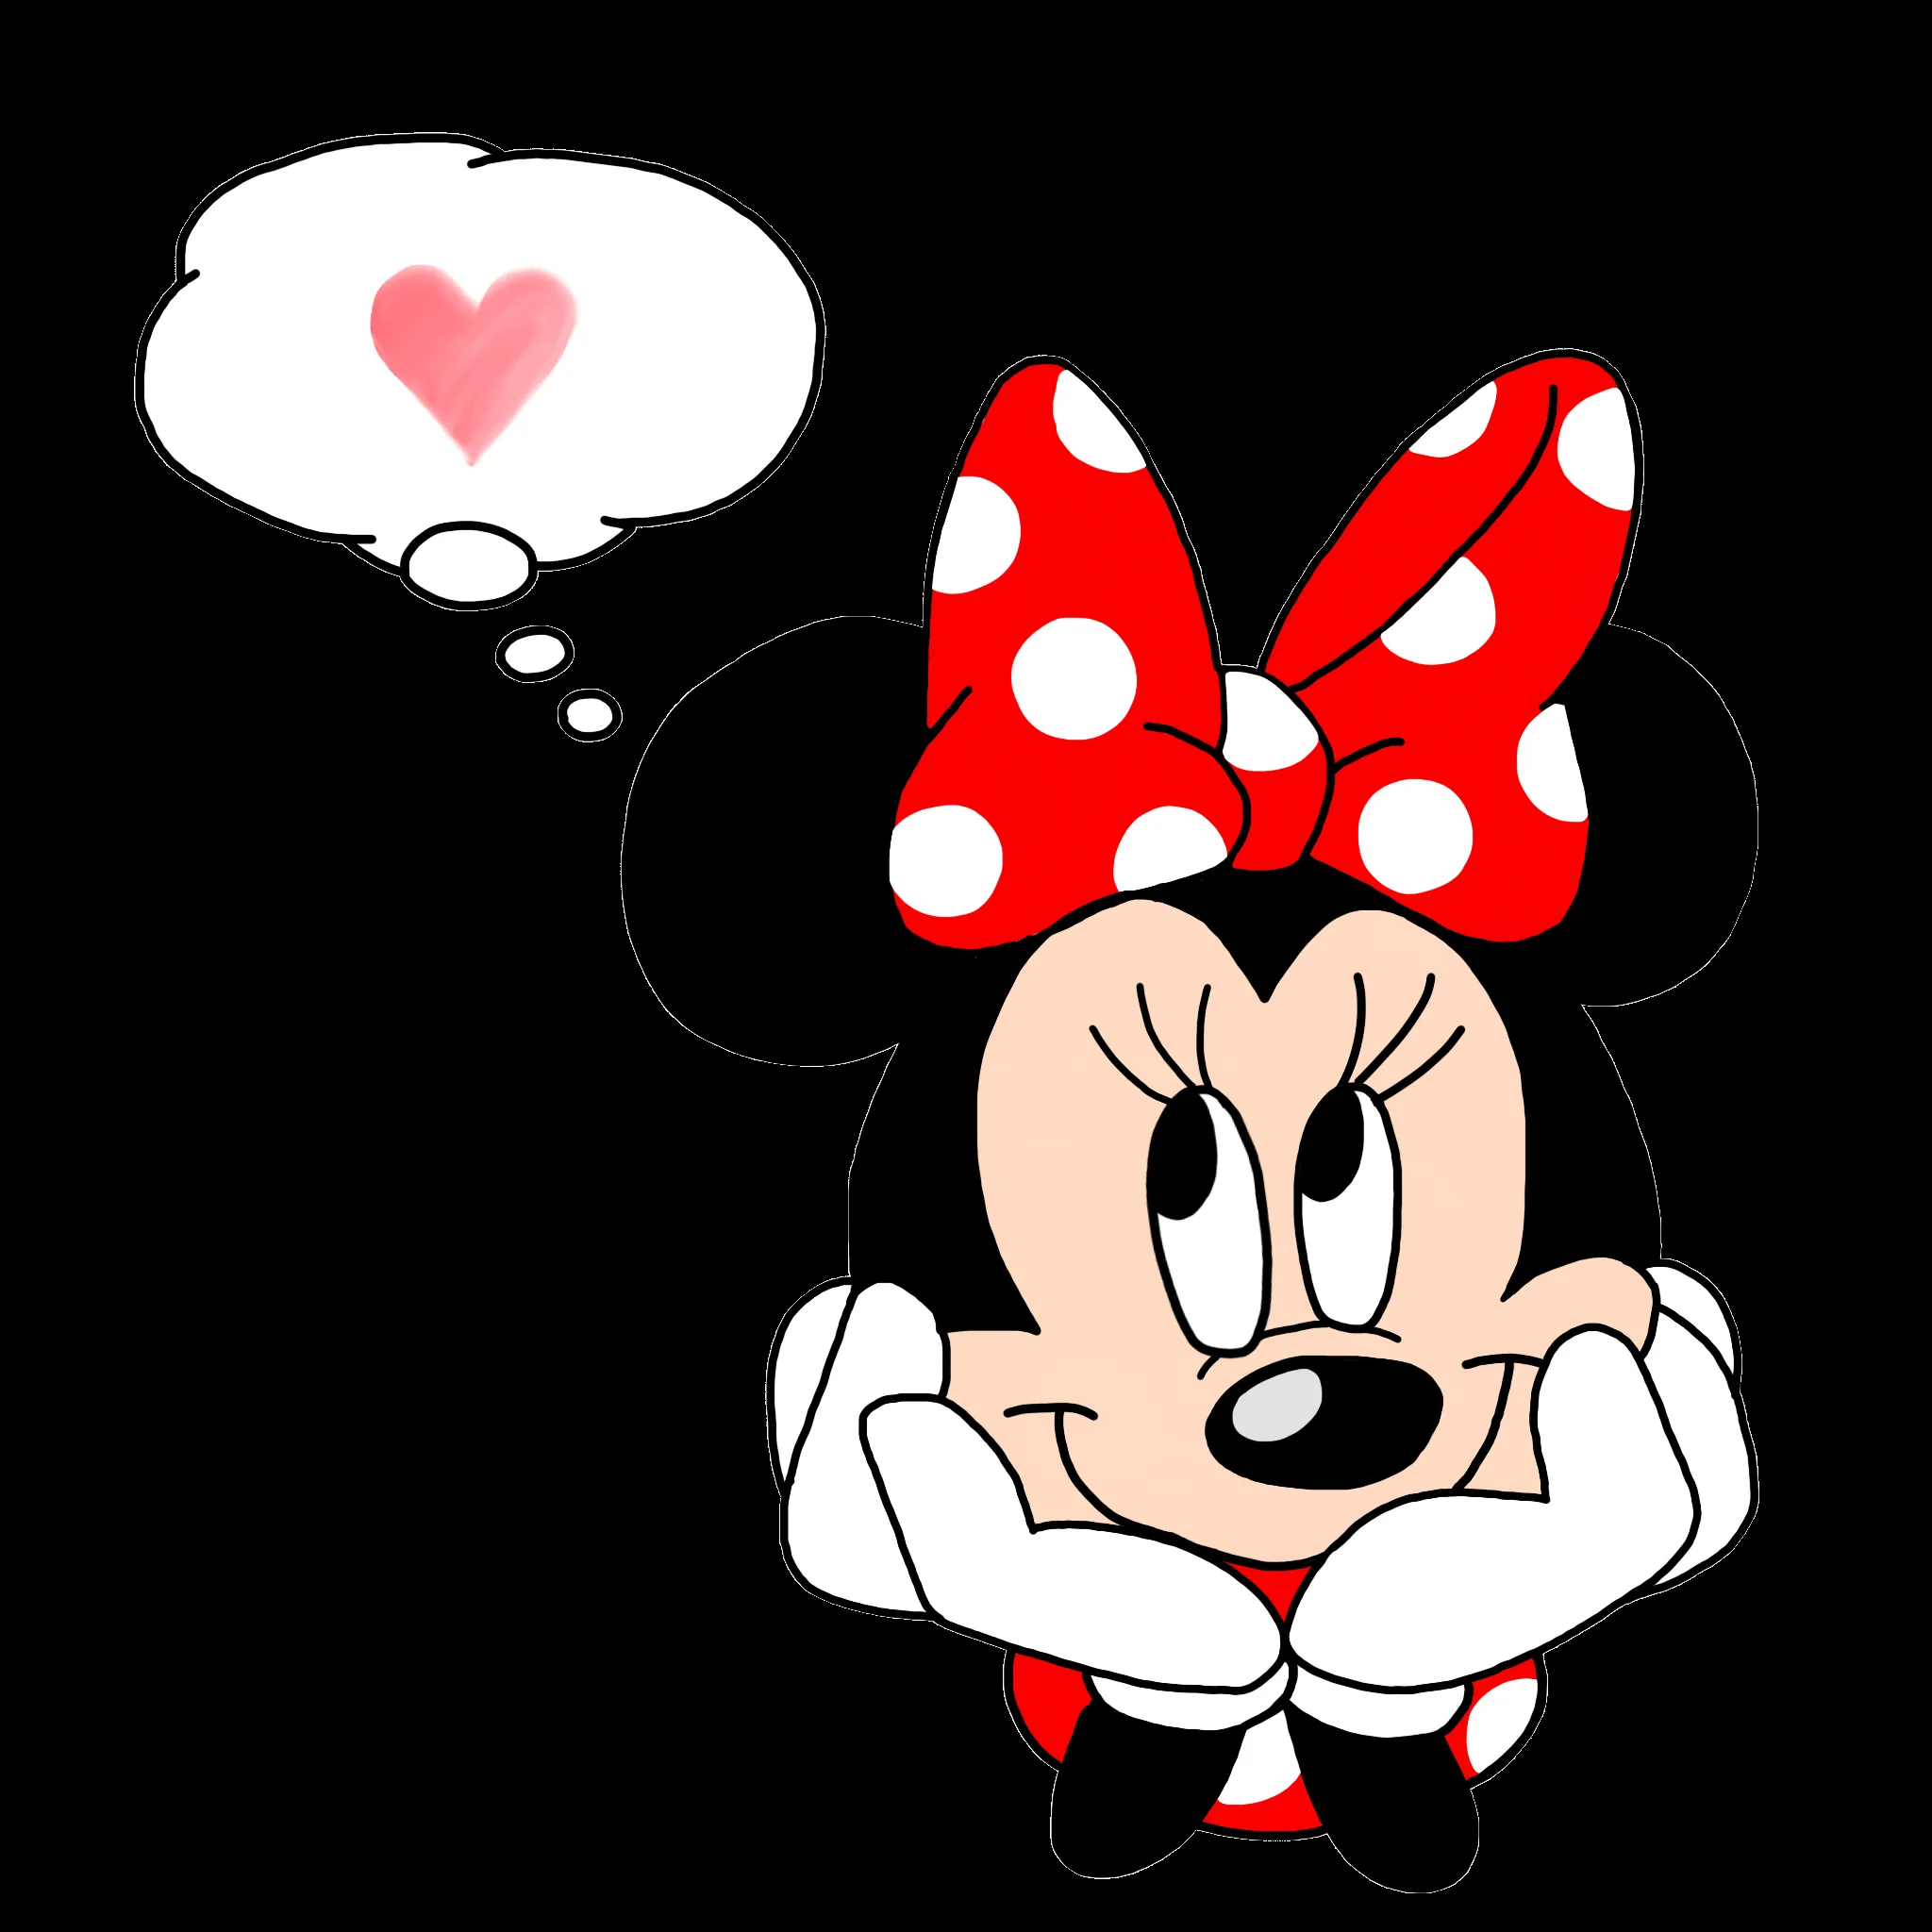 Minnie Mouse #1 PNG/TRANSPARENT OVERLAY by mcjjang on DeviantArt